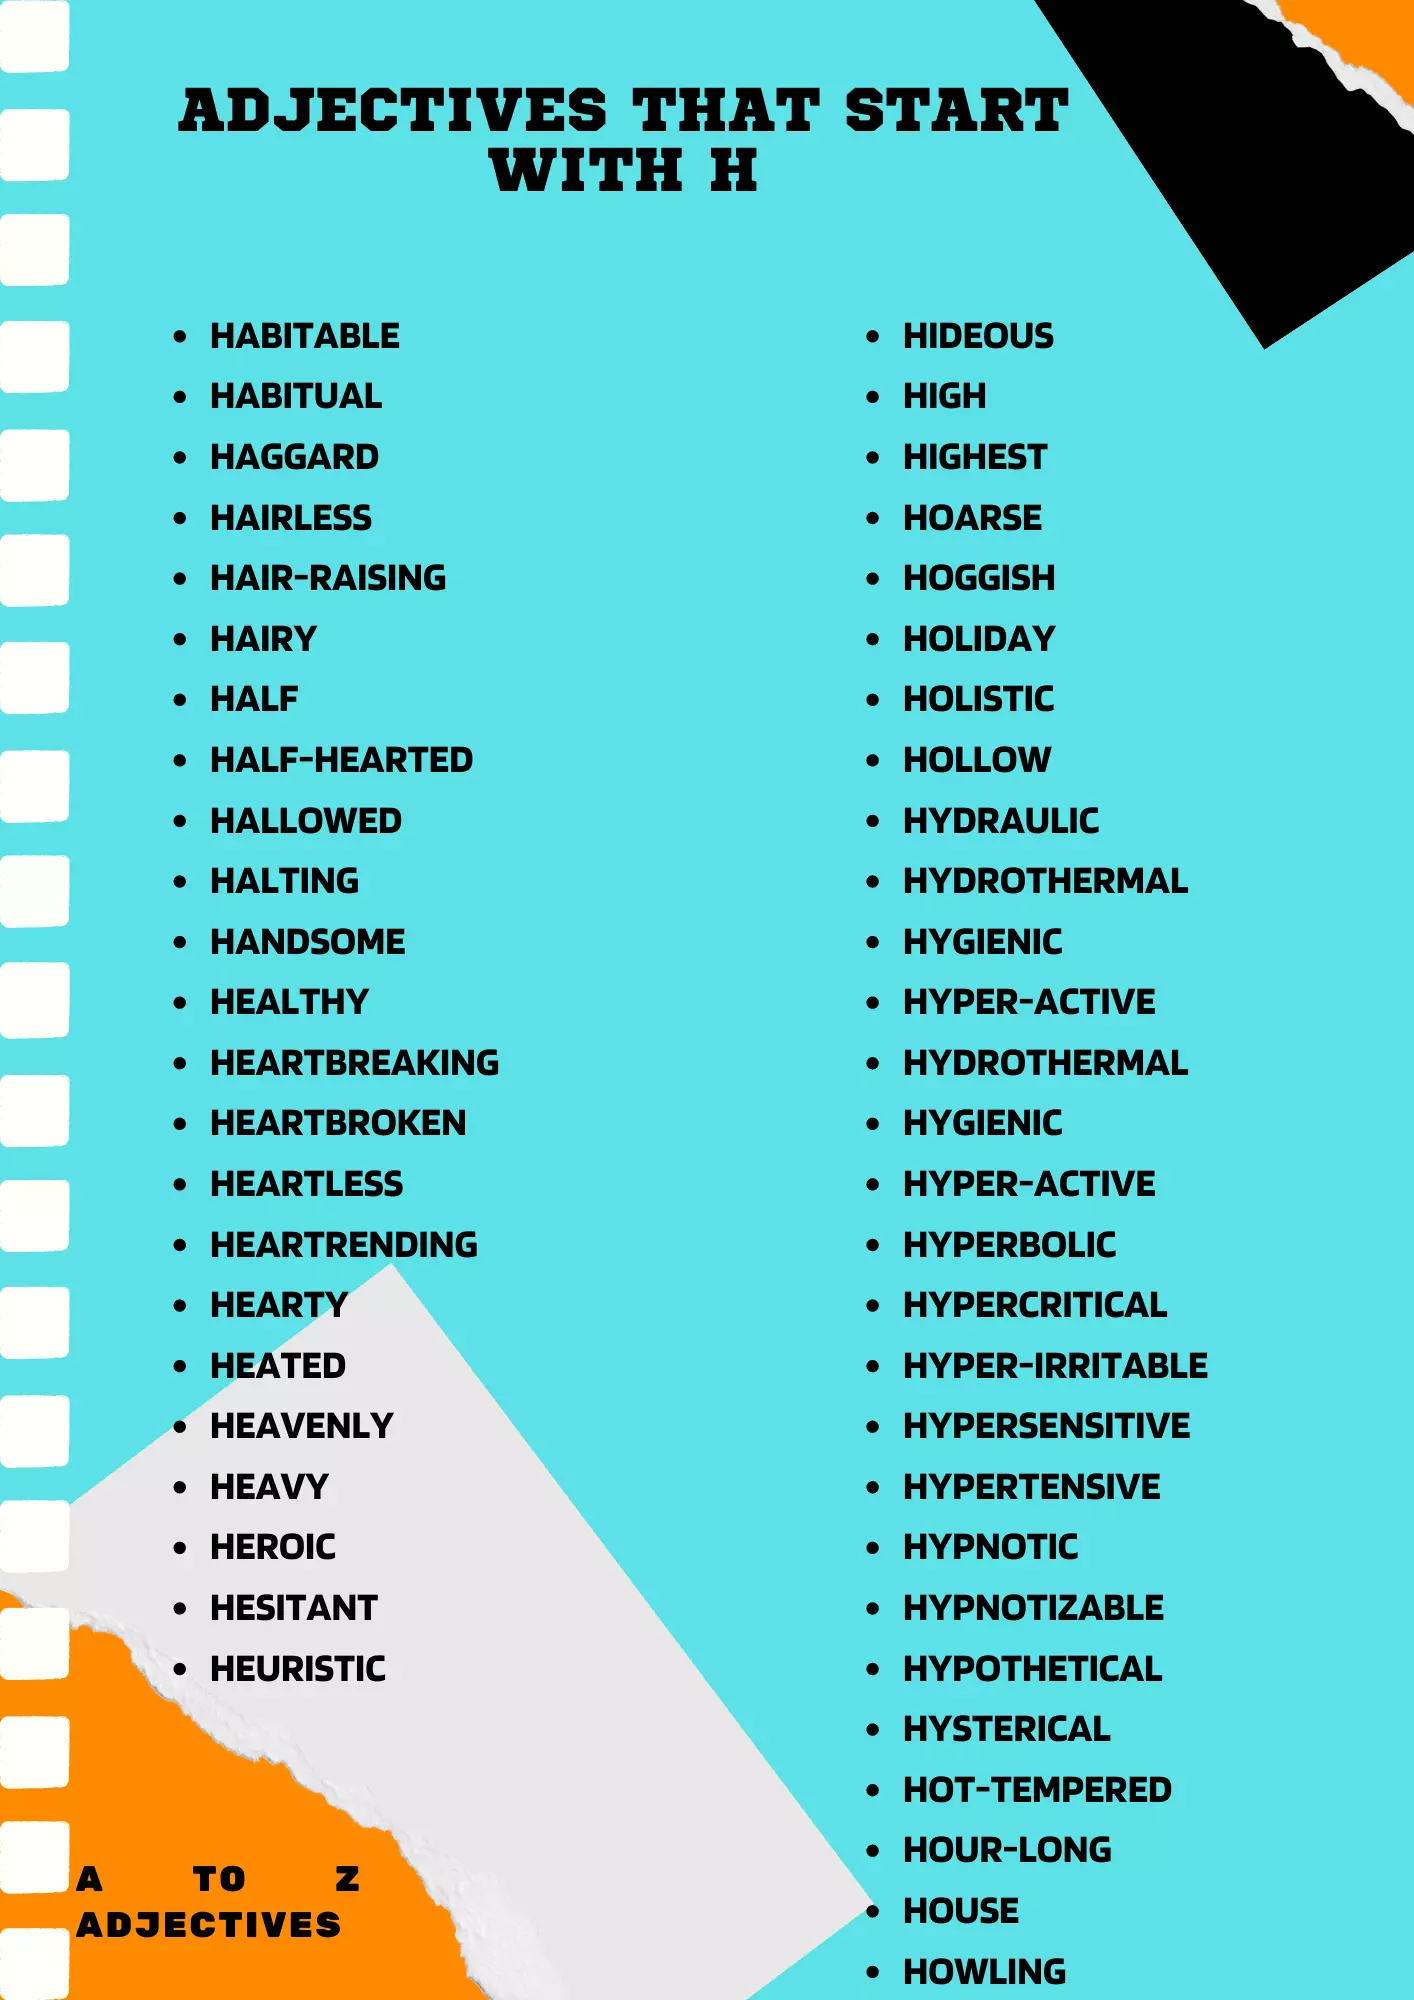 adjectives that start with H